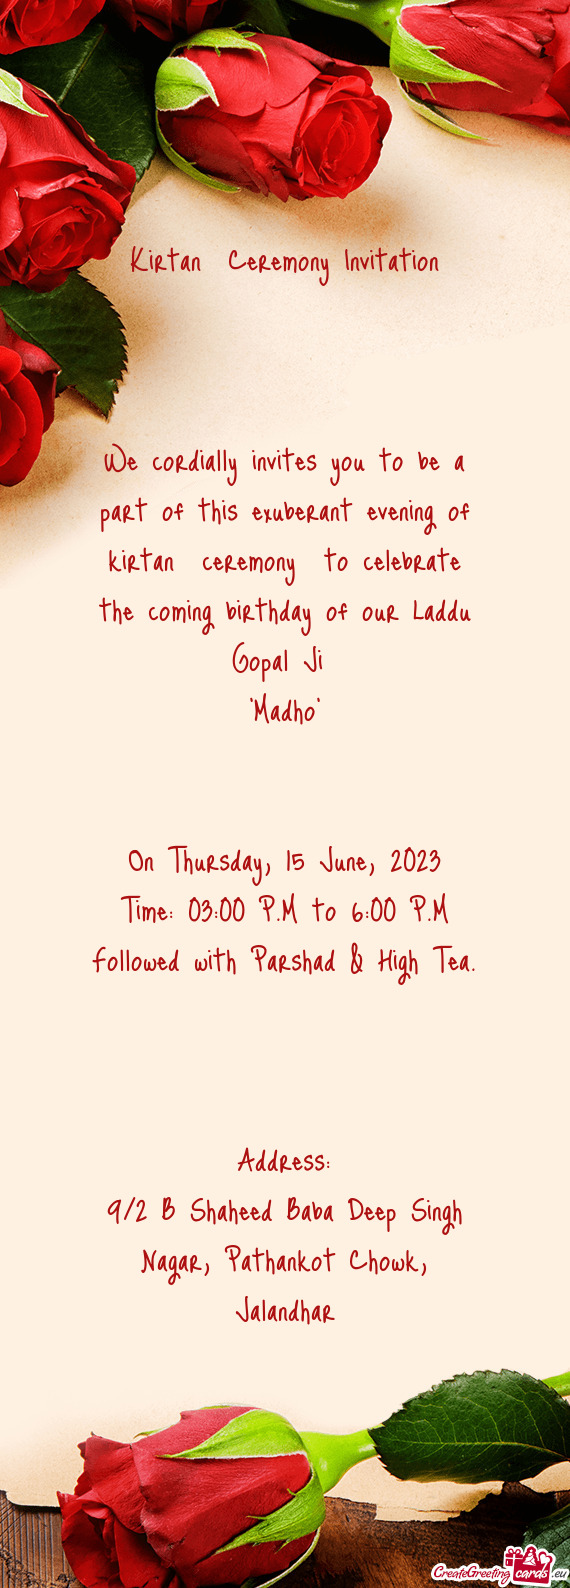 Of kirtan ceremony to celebrate the coming birthday of our Laddu Gopal Ji "Madho"  On Thursd